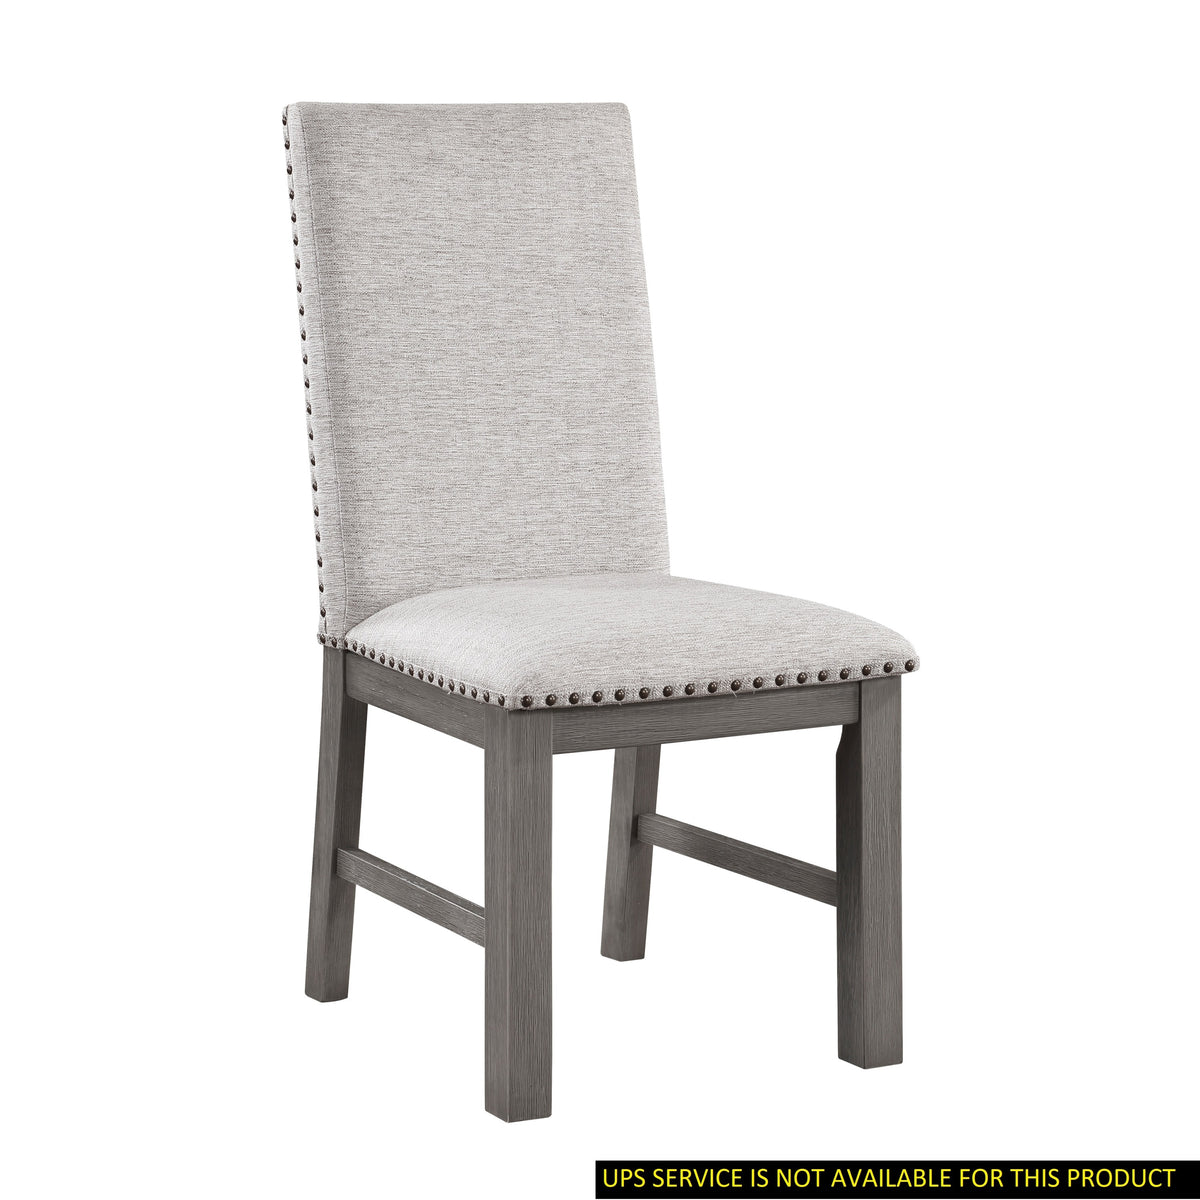 Dining Chairs Grey Finish Wood Frame Rustic Design - Beige